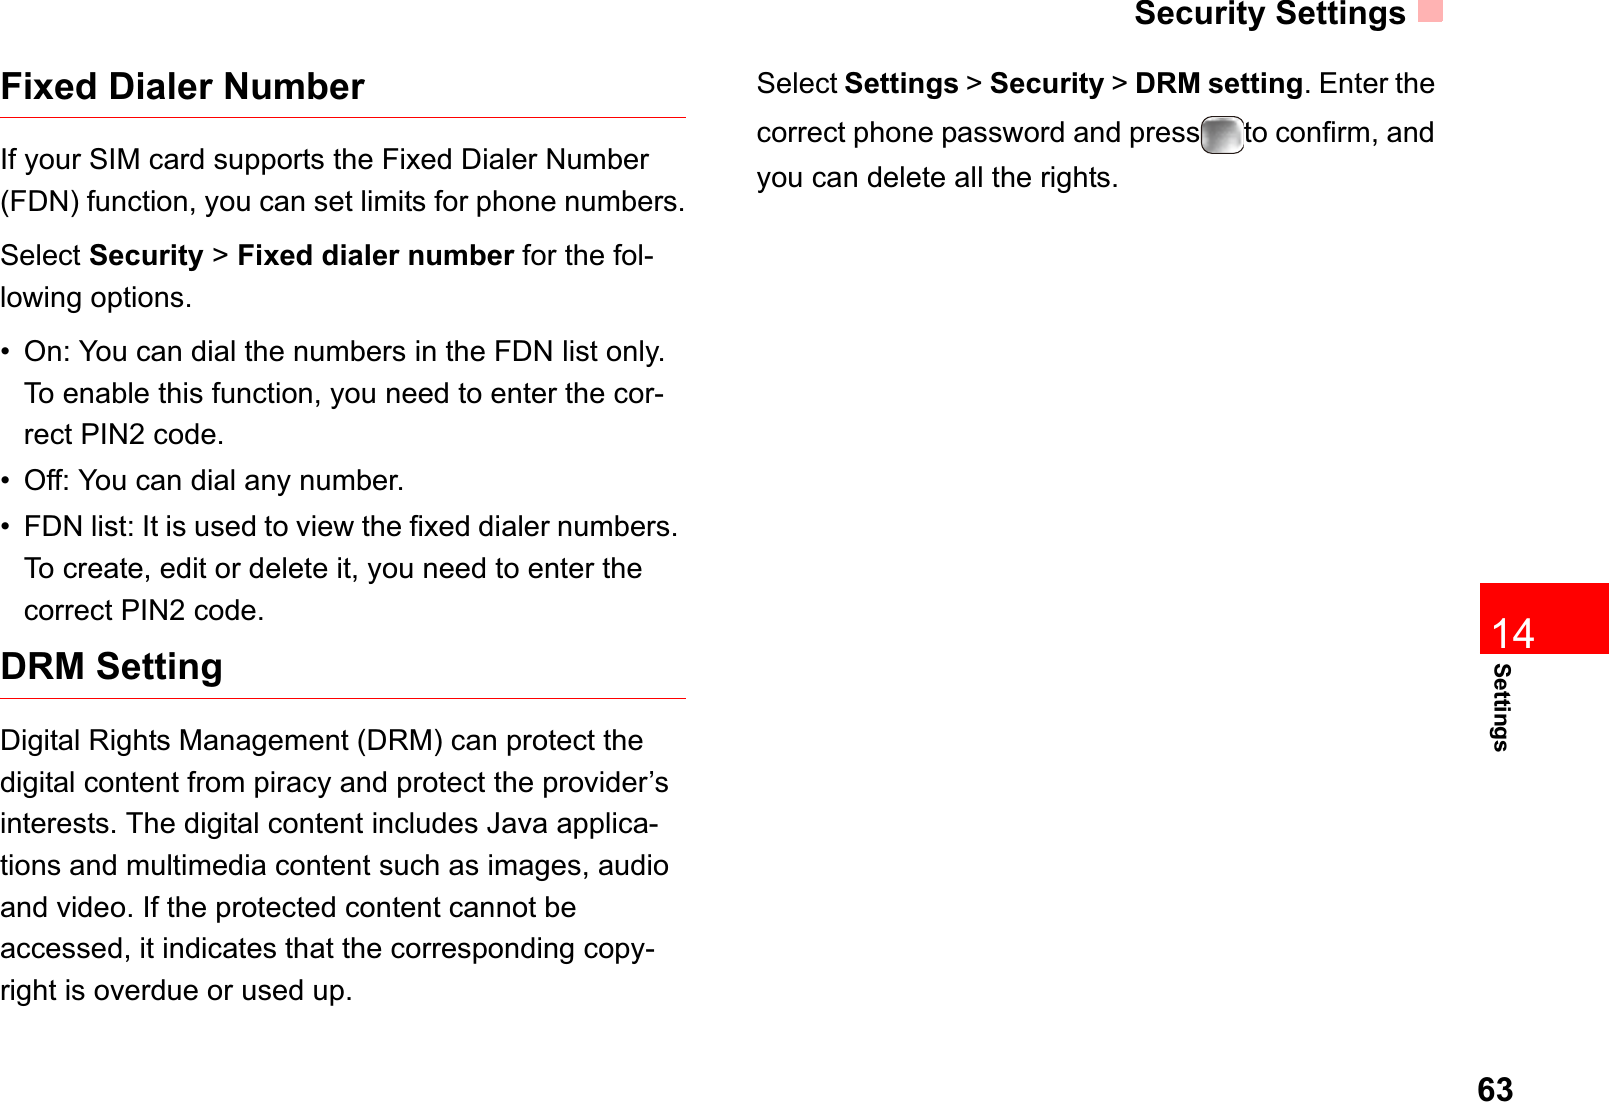 Security Settings6314SettingsFixed Dialer NumberIf your SIM card supports the Fixed Dialer Number (FDN) function, you can set limits for phone numbers.Select Security &gt;Fixed dialer number for the fol-lowing options.• On: You can dial the numbers in the FDN list only. To enable this function, you need to enter the cor-rect PIN2 code.• Off: You can dial any number.• FDN list: It is used to view the fixed dialer numbers. To create, edit or delete it, you need to enter the correct PIN2 code.DRM SettingDigital Rights Management (DRM) can protect the digital content from piracy and protect the provider’s interests. The digital content includes Java applica-tions and multimedia content such as images, audio and video. If the protected content cannot be accessed, it indicates that the corresponding copy-right is overdue or used up. Select Settings &gt; Security &gt; DRM setting. Enter the correct phone password and press to confirm, and you can delete all the rights. 